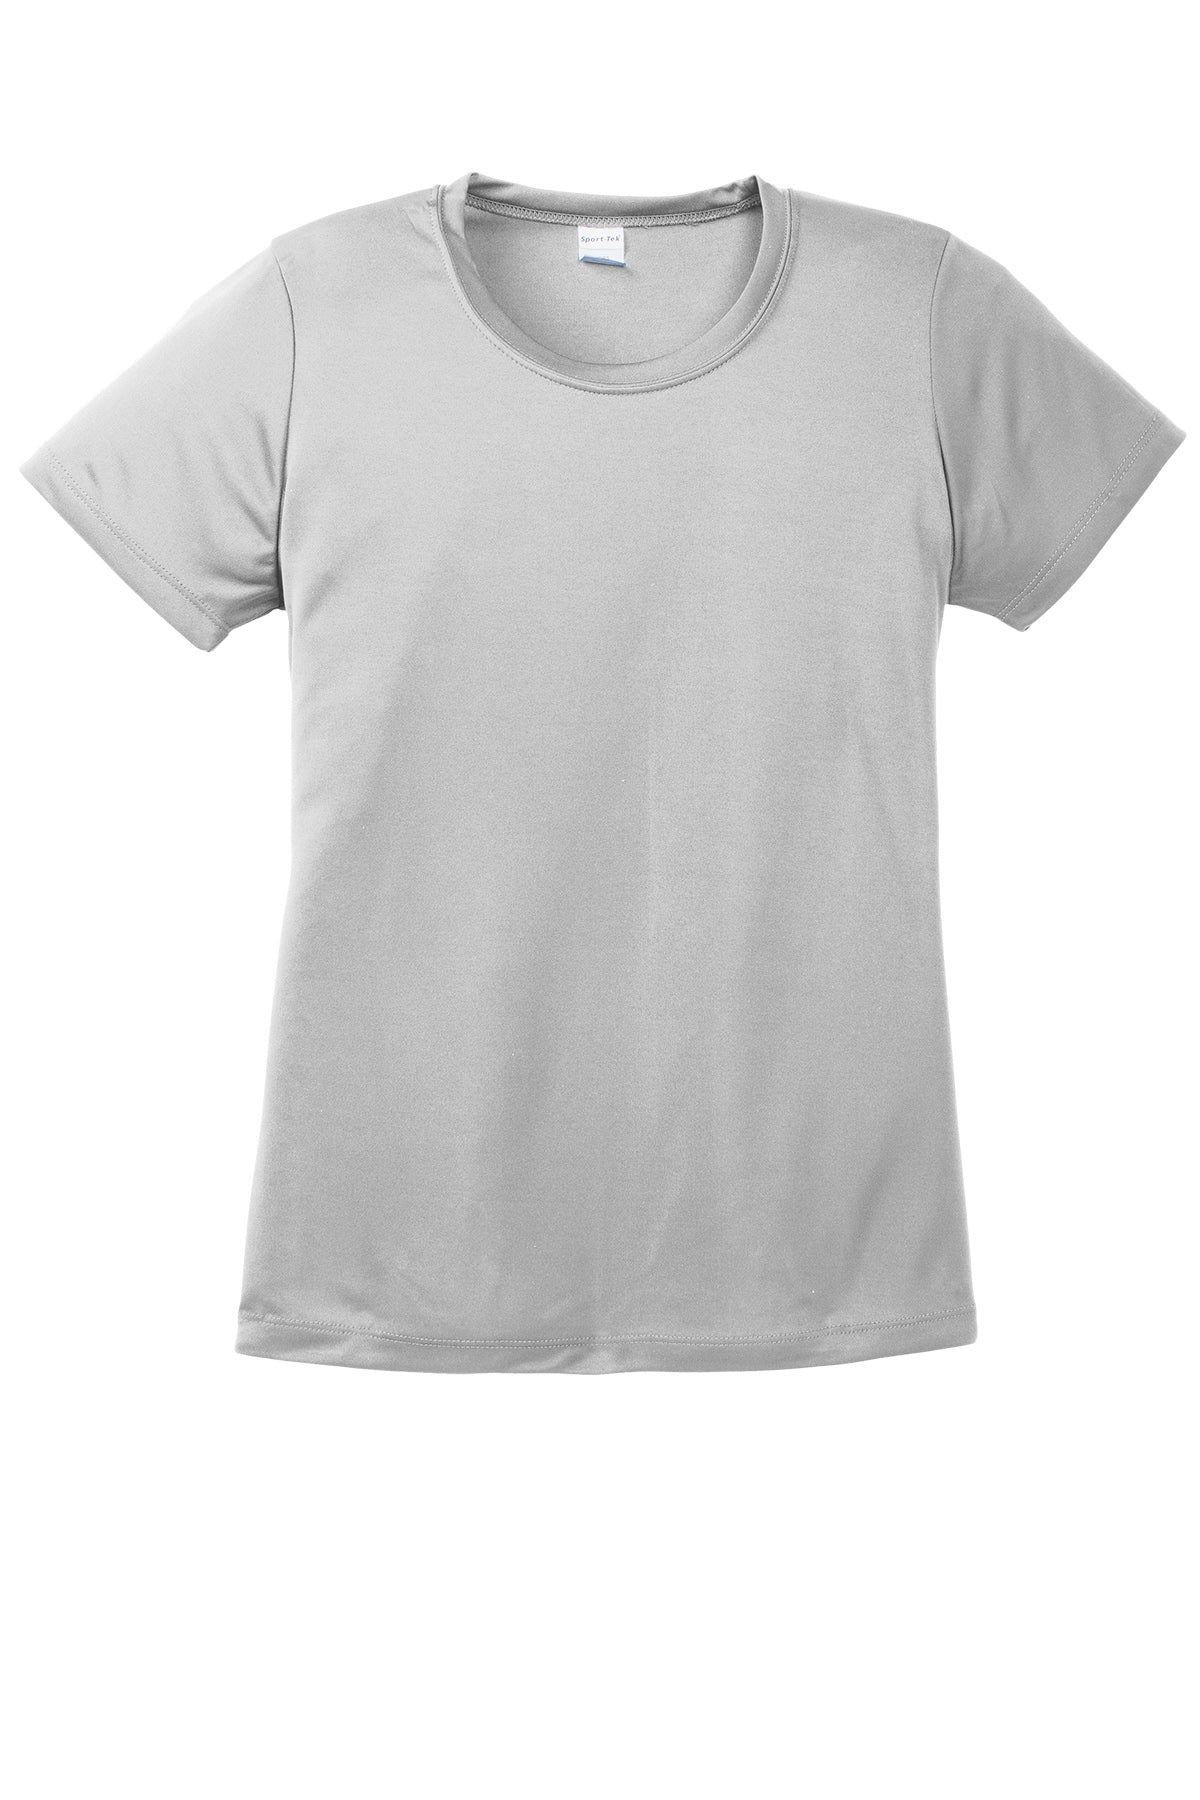 Sport-Tek Lst350 Polyester Ladies T-Shirt Ad Small / Silver